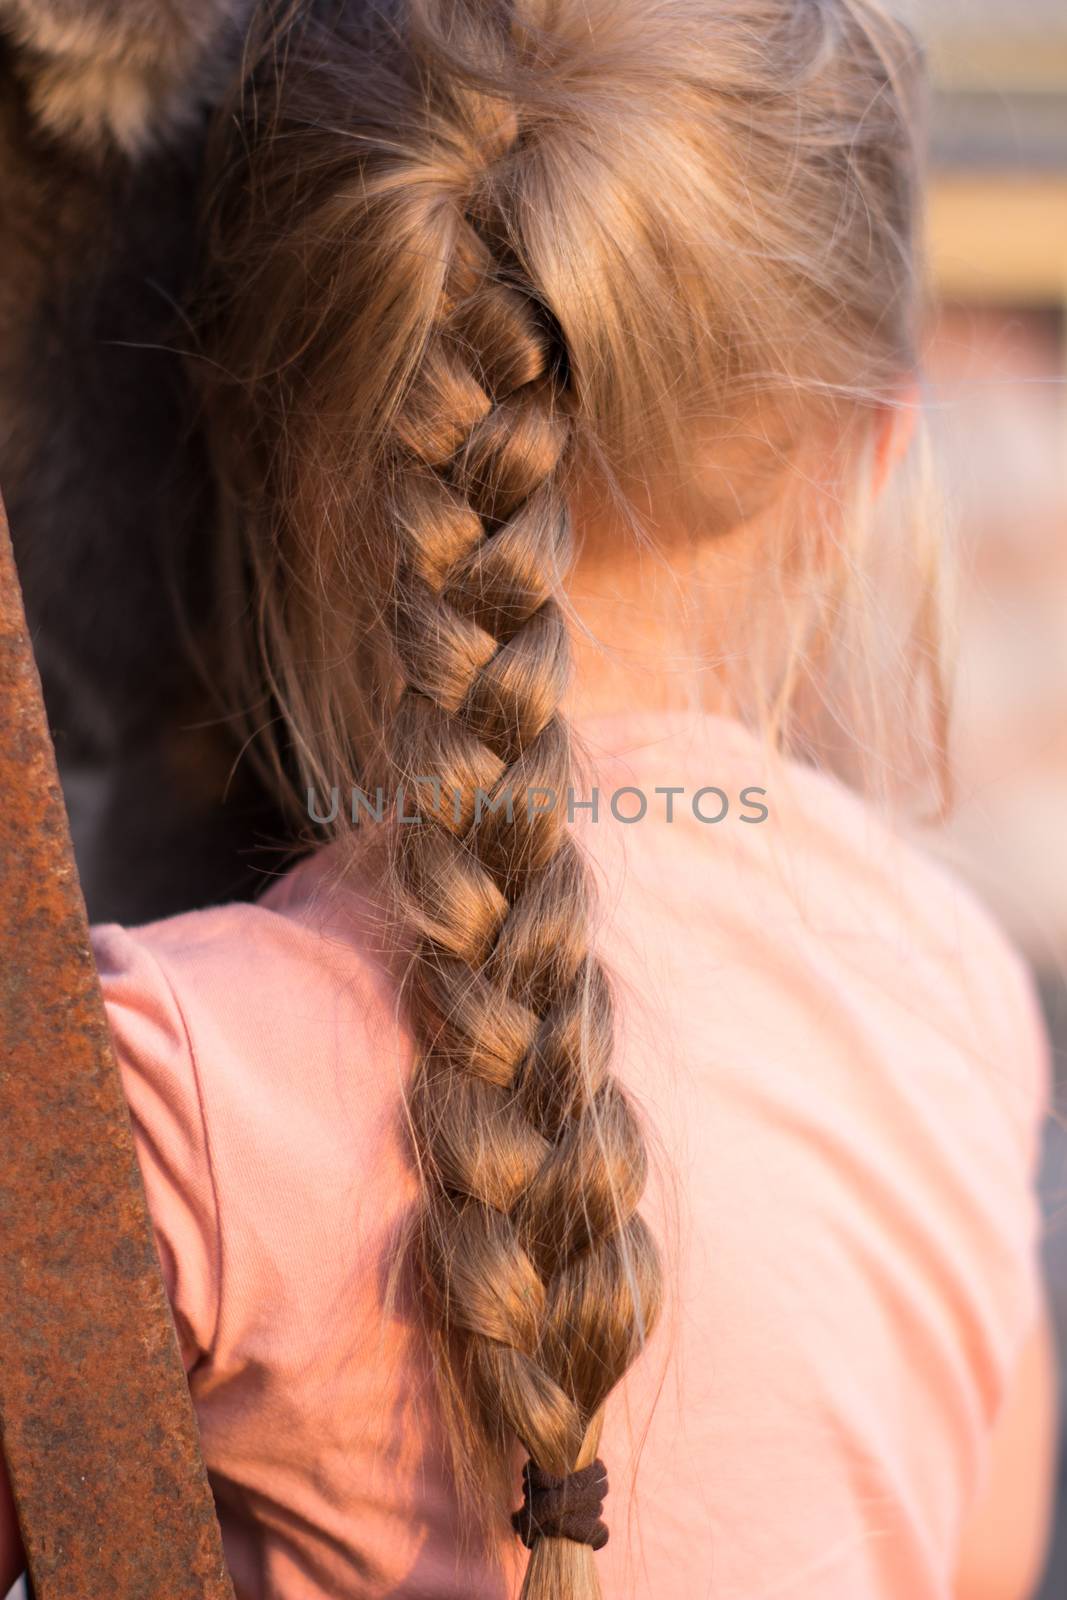 Pigtail of hair at the girl. Women's hair close-up. by AnatoliiFoto